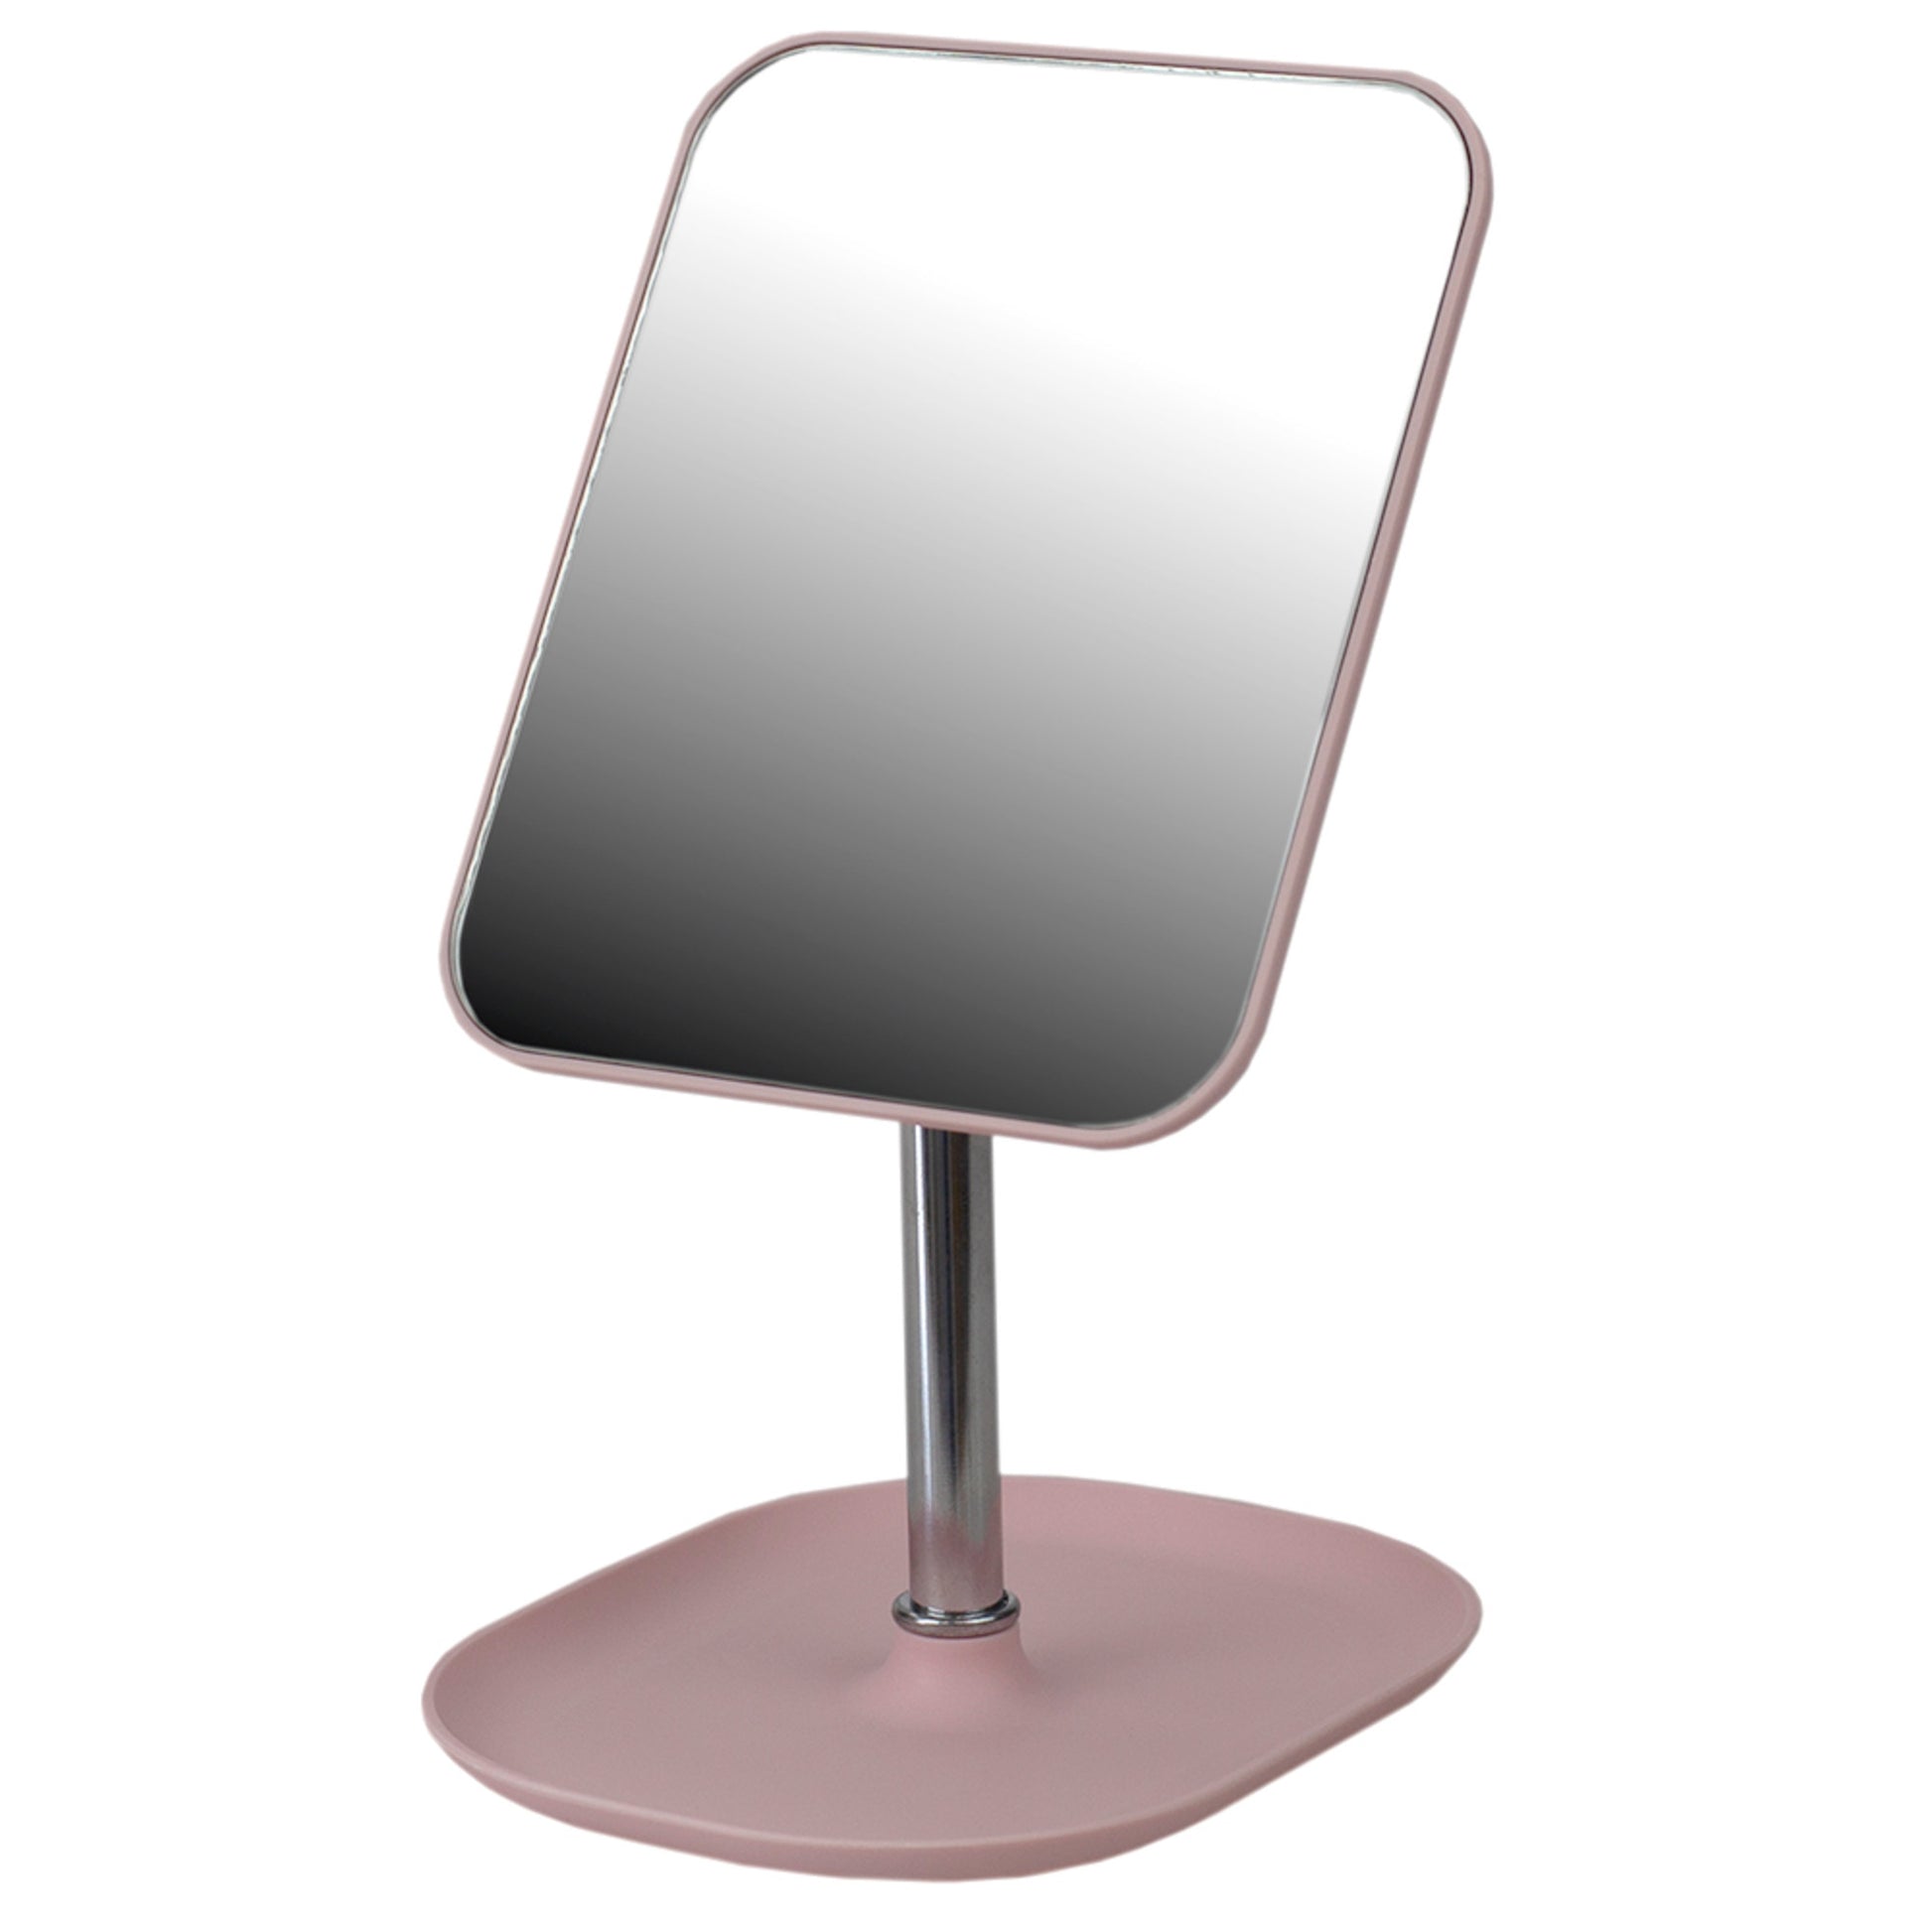 Home Basics Modern & Contemporary Double Sided Adjustable Smooth Swivel Square Makeup Mirror with Plastic Frame and Tray Base, Pink - Pink